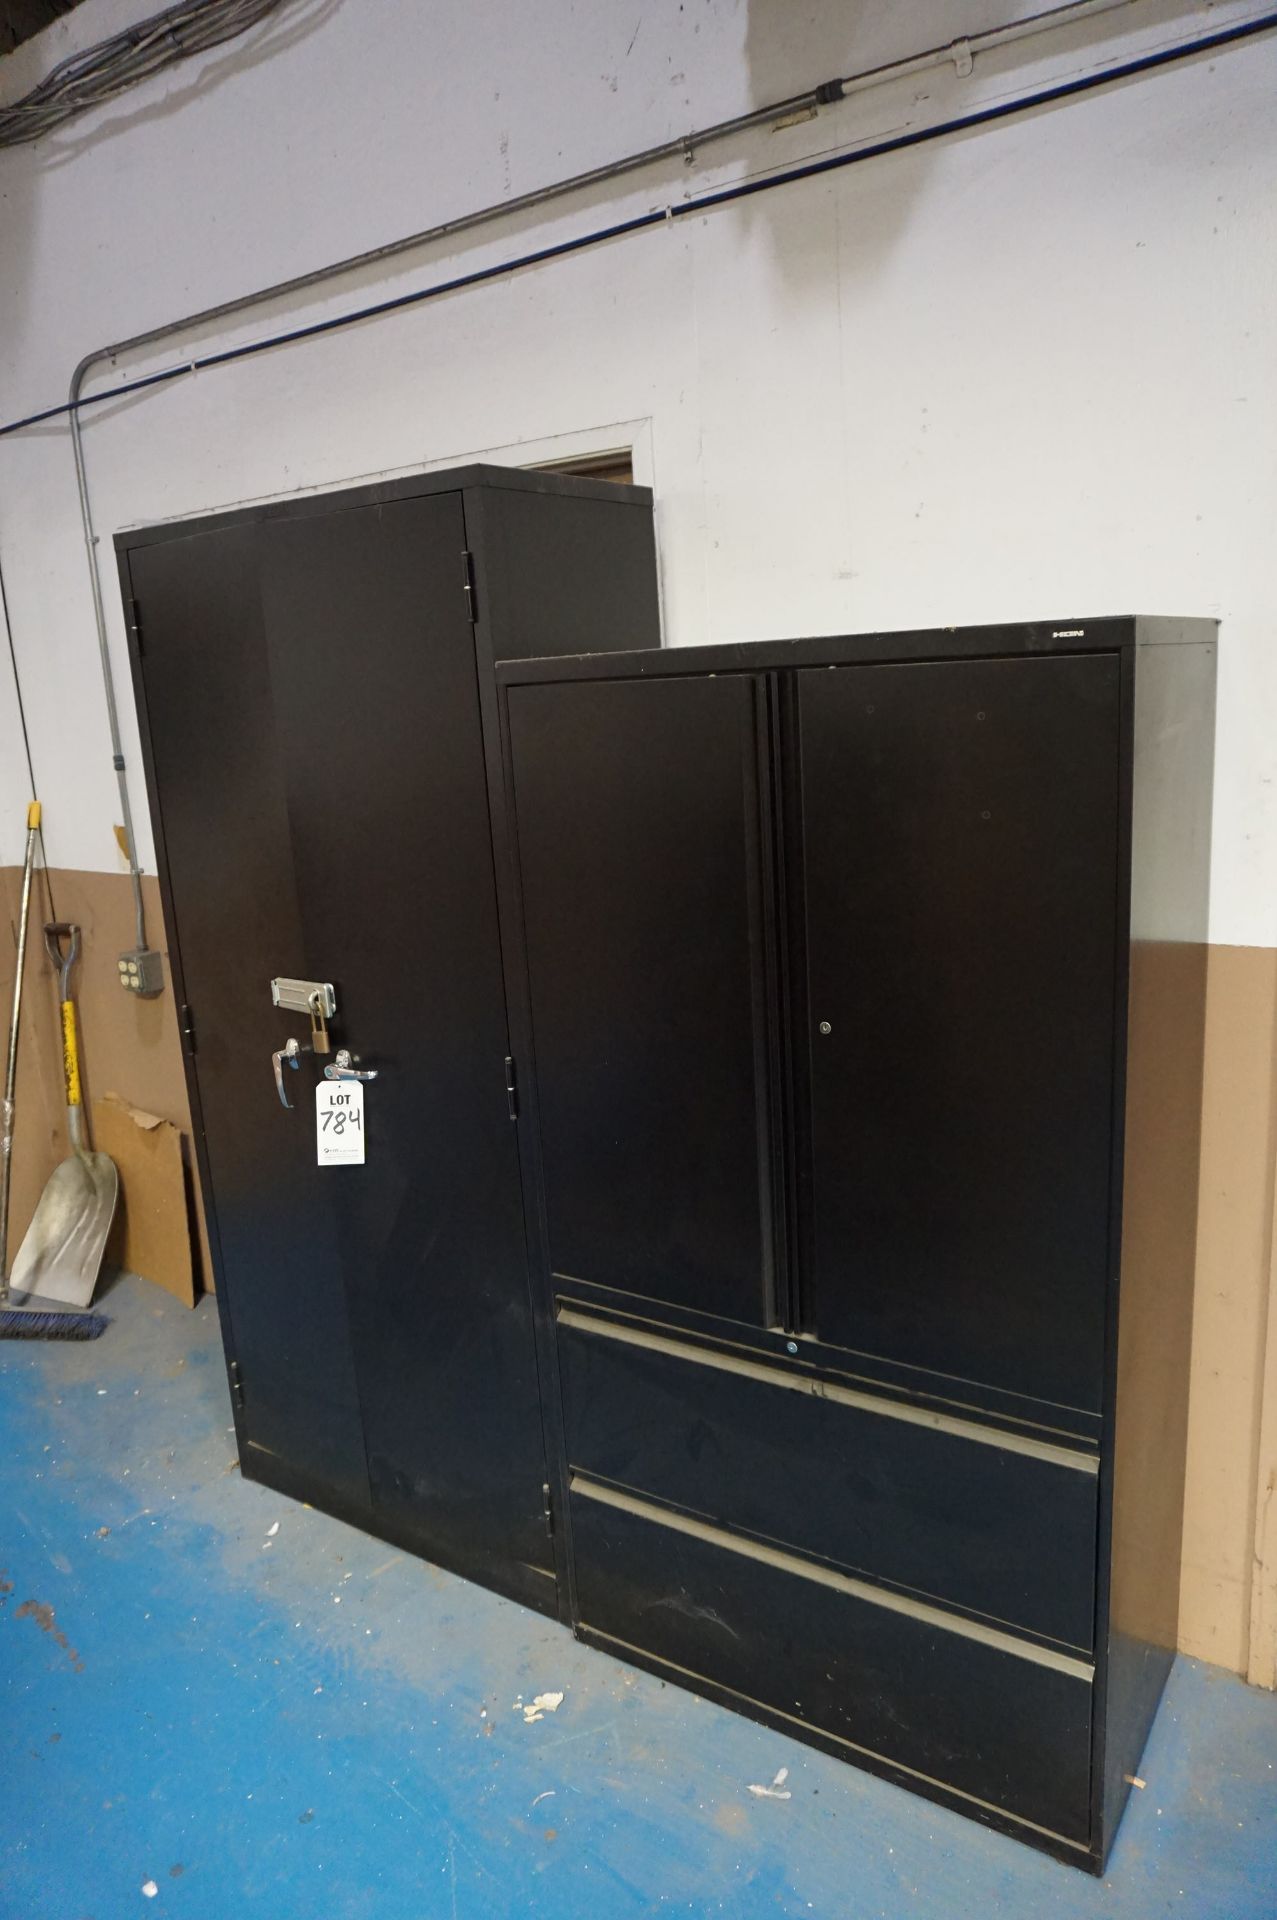 (2) STEEL CABINETS **Rigging provided exclusively by Golden Bear Services. Loading fee for this item